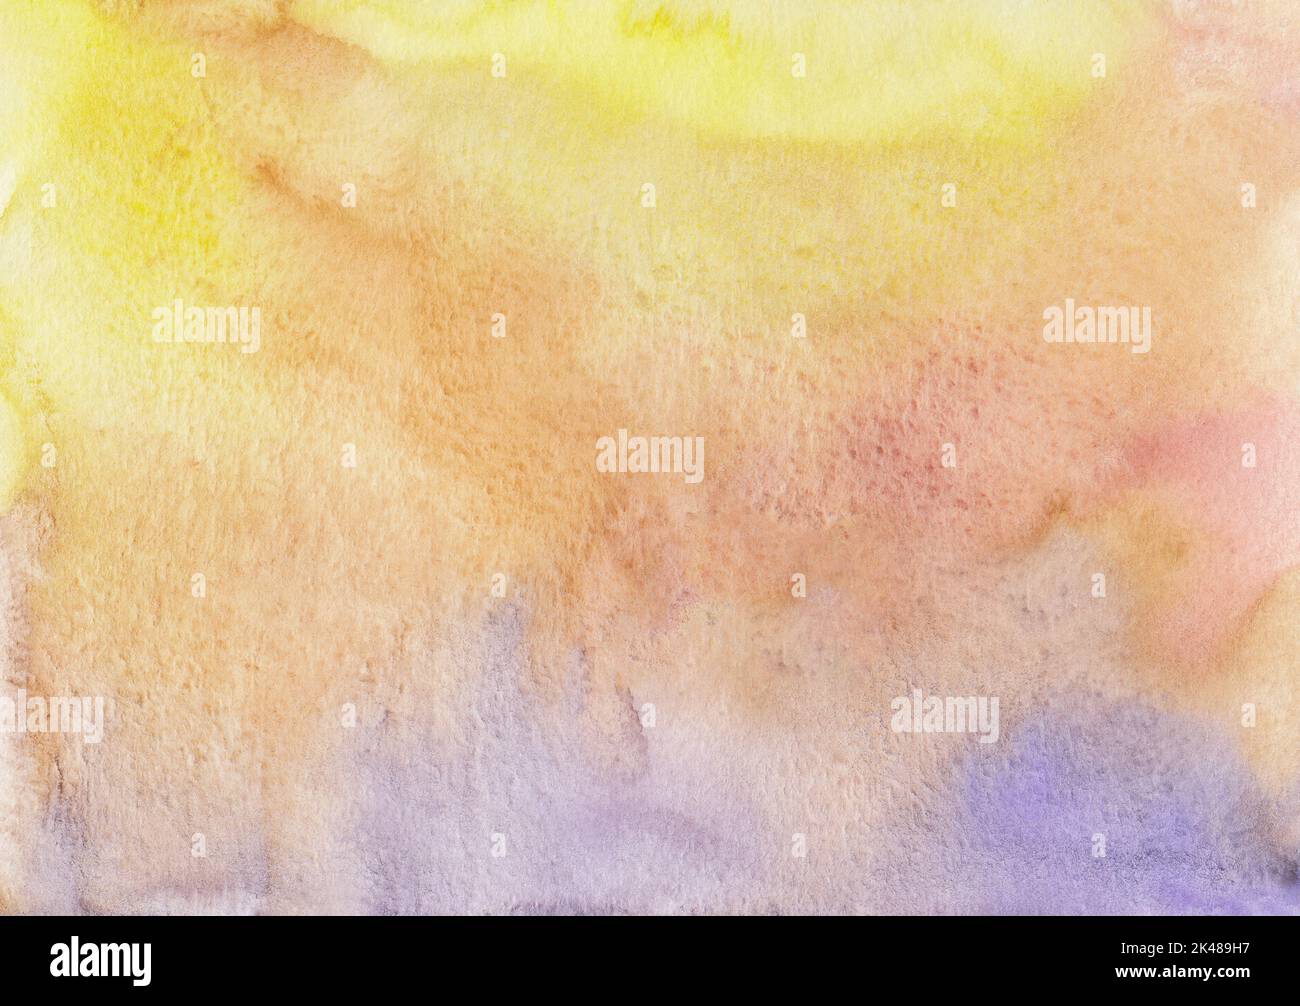 Watercolor ombre pastel yellow, orange, purple background texture, hand  painted. Aquarelle gradient light backdrop, stains on paper. Artistic  painting Stock Photo - Alamy